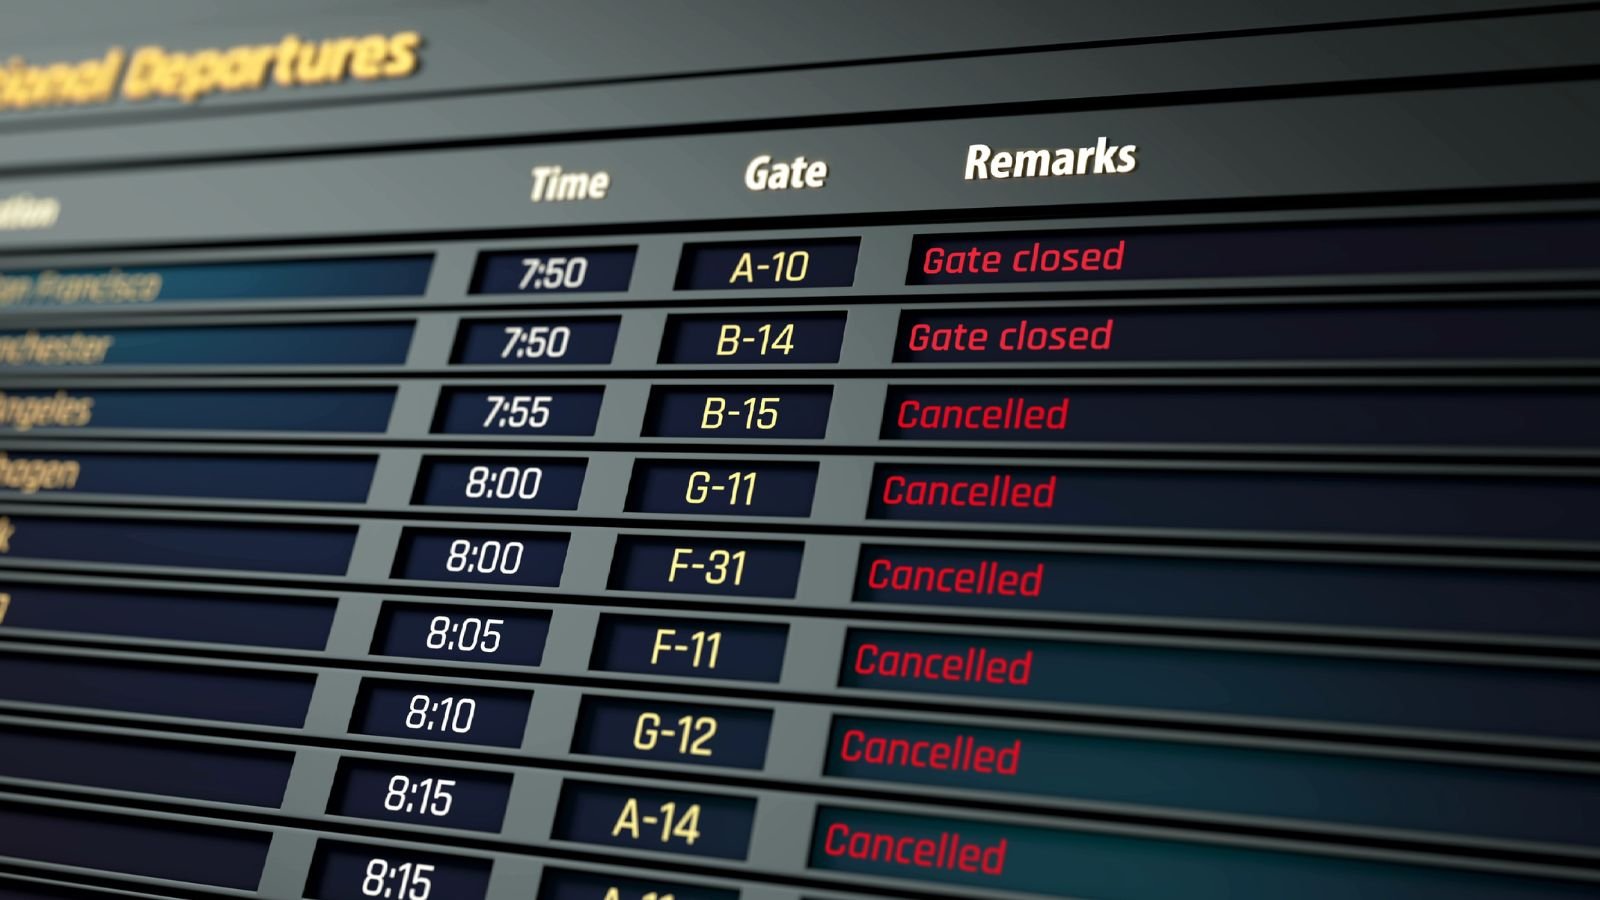 Cancellations on Departure Board